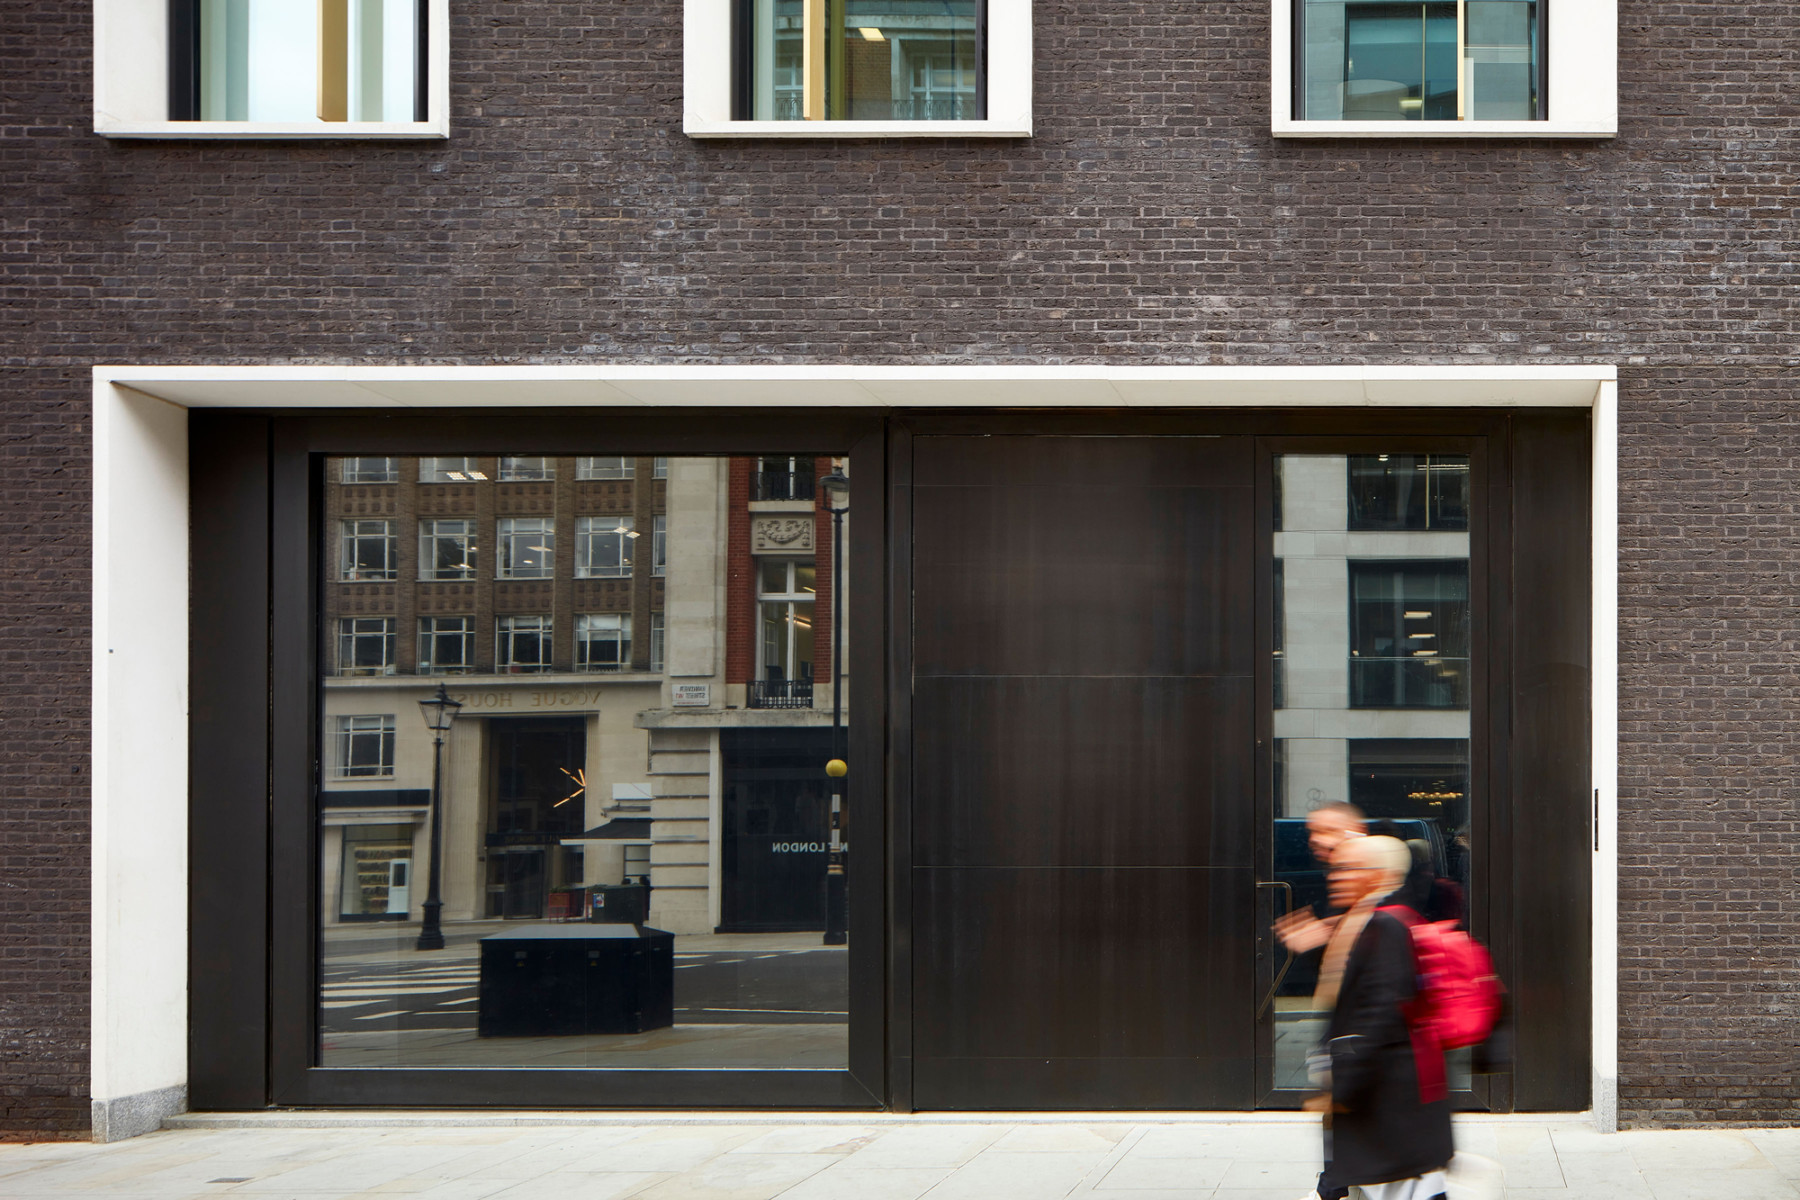 Pace-gallery-hanover-square-jamie-fobert-architects-exterior